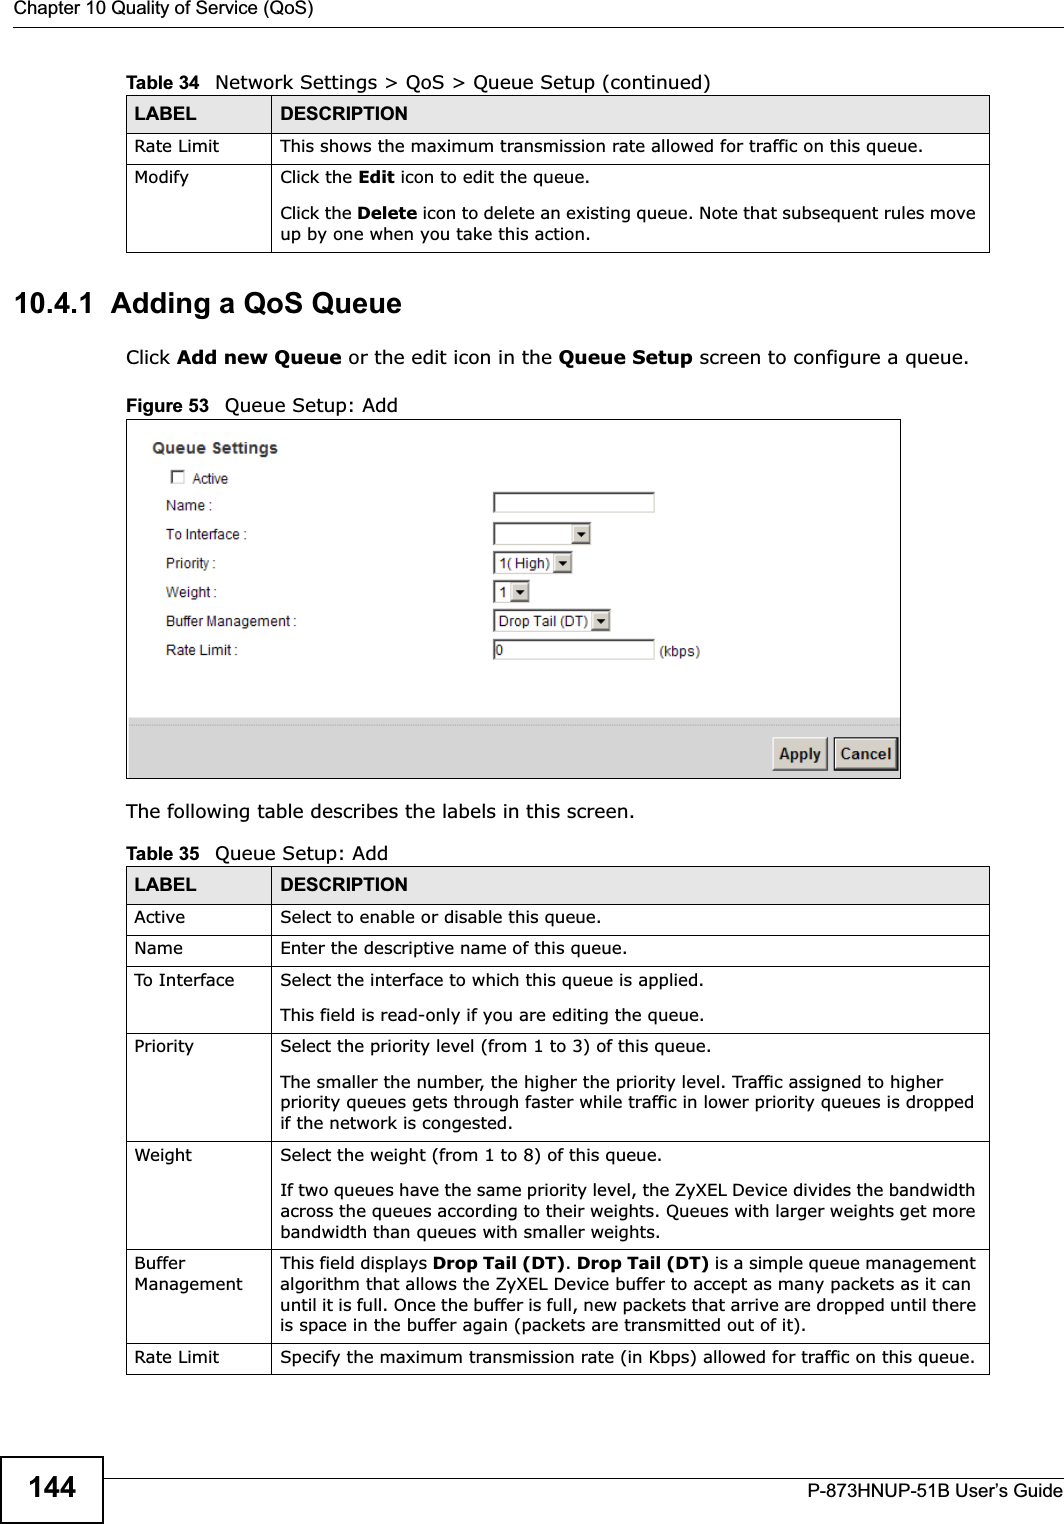 Chapter 10 Quality of Service (QoS)P-873HNUP-51B User’s Guide14410.4.1  Adding a QoS Queue Click Add new Queue or the edit icon in the Queue Setup screen to configure a queue. Figure 53   Queue Setup: Add The following table describes the labels in this screen.  Rate Limit This shows the maximum transmission rate allowed for traffic on this queue.Modify Click the Edit icon to edit the queue.Click the Delete icon to delete an existing queue. Note that subsequent rules move up by one when you take this action.Table 34   Network Settings &gt; QoS &gt; Queue Setup (continued)LABEL DESCRIPTIONTable 35   Queue Setup: AddLABEL DESCRIPTIONActive Select to enable or disable this queue.Name Enter the descriptive name of this queue.To In terf ace Select the interface to which this queue is applied.This field is read-only if you are editing the queue.Priority Select the priority level (from 1 to 3) of this queue.The smaller the number, the higher the priority level. Traffic assigned to higher priority queues gets through faster while traffic in lower priority queues is dropped if the network is congested.Weight Select the weight (from 1 to 8) of this queue. If two queues have the same priority level, the ZyXEL Device divides the bandwidth across the queues according to their weights. Queues with larger weights get more bandwidth than queues with smaller weights.Buffer ManagementThis field displays Drop Tail (DT).Drop Tail (DT) is a simple queue management algorithm that allows the ZyXEL Device buffer to accept as many packets as it can until it is full. Once the buffer is full, new packets that arrive are dropped until there is space in the buffer again (packets are transmitted out of it). Rate Limit Specify the maximum transmission rate (in Kbps) allowed for traffic on this queue.